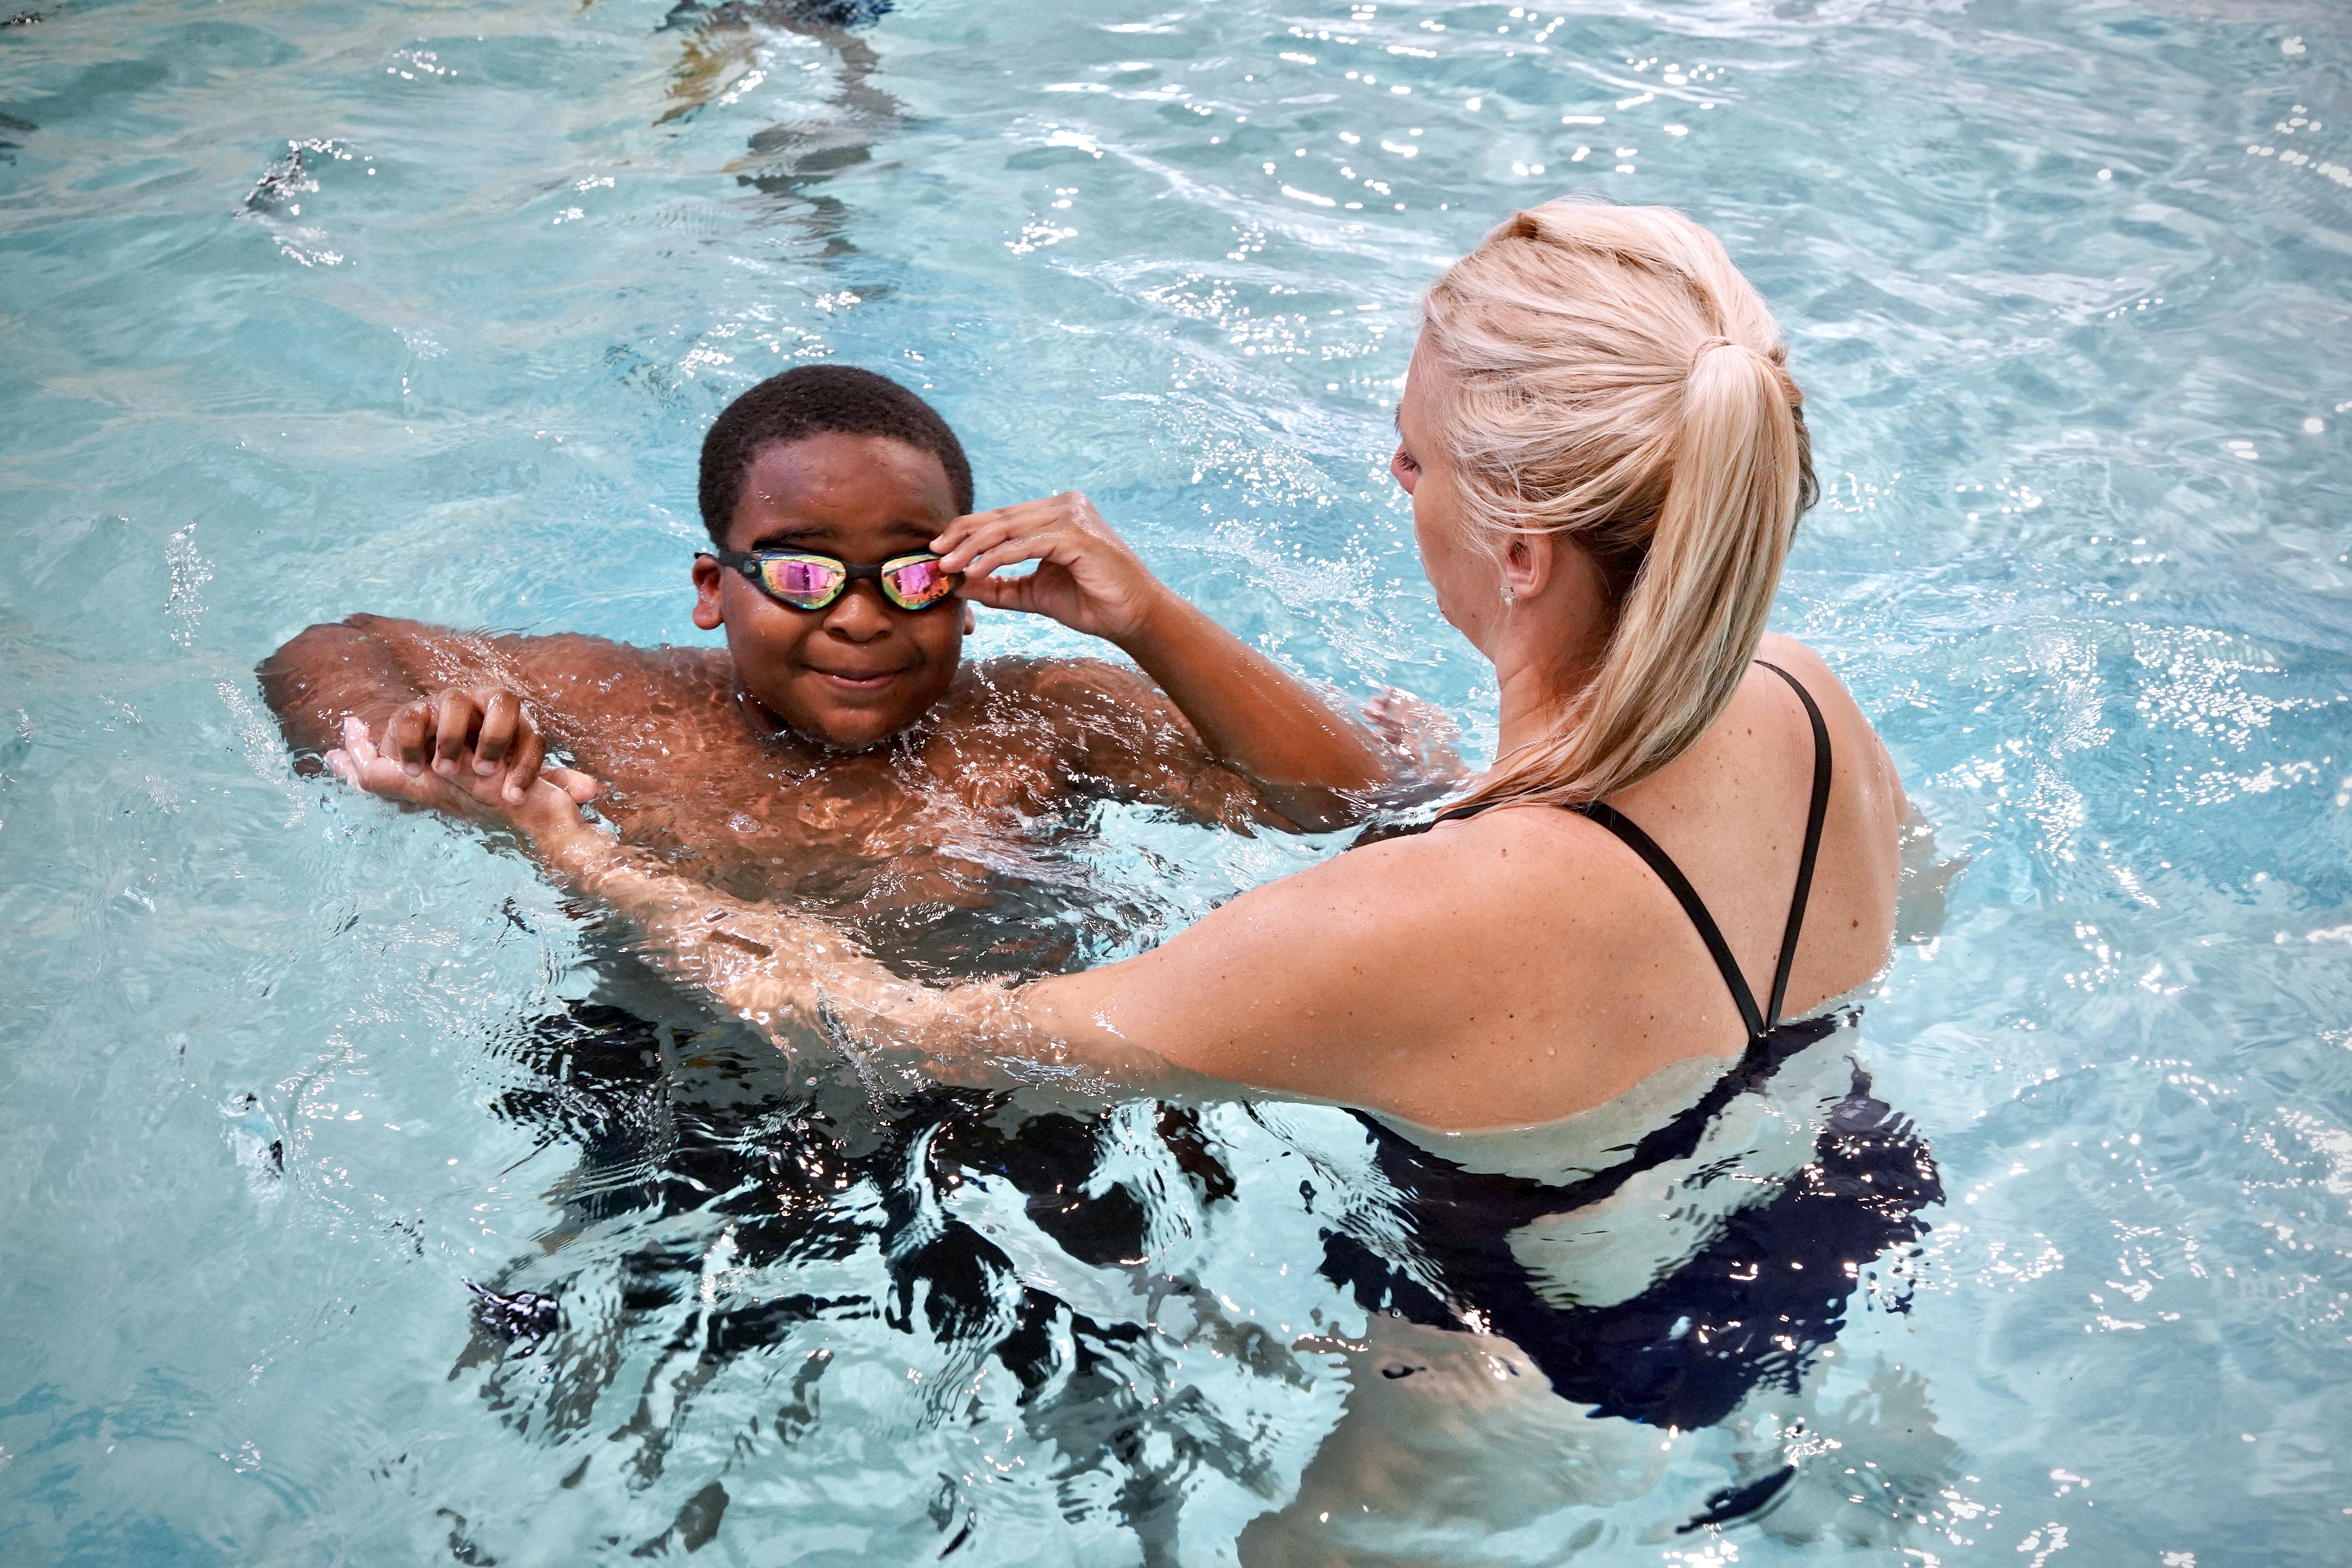 A spate of drownings: Classes help Black Americans learn to swim